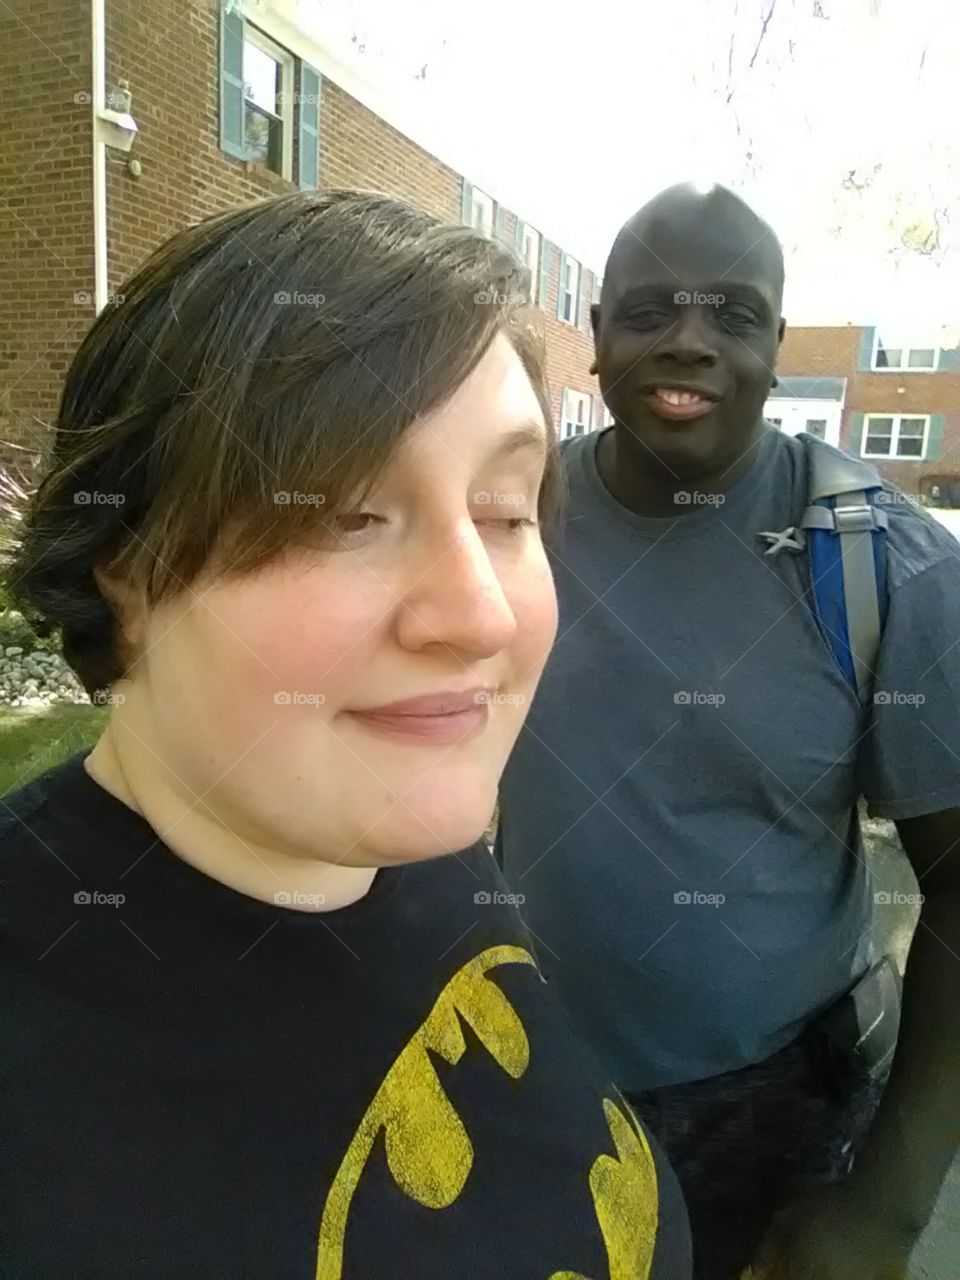 Heading  for the bus, taking a selfie my boyfriend and I, May Spring 2017 beautiful day.